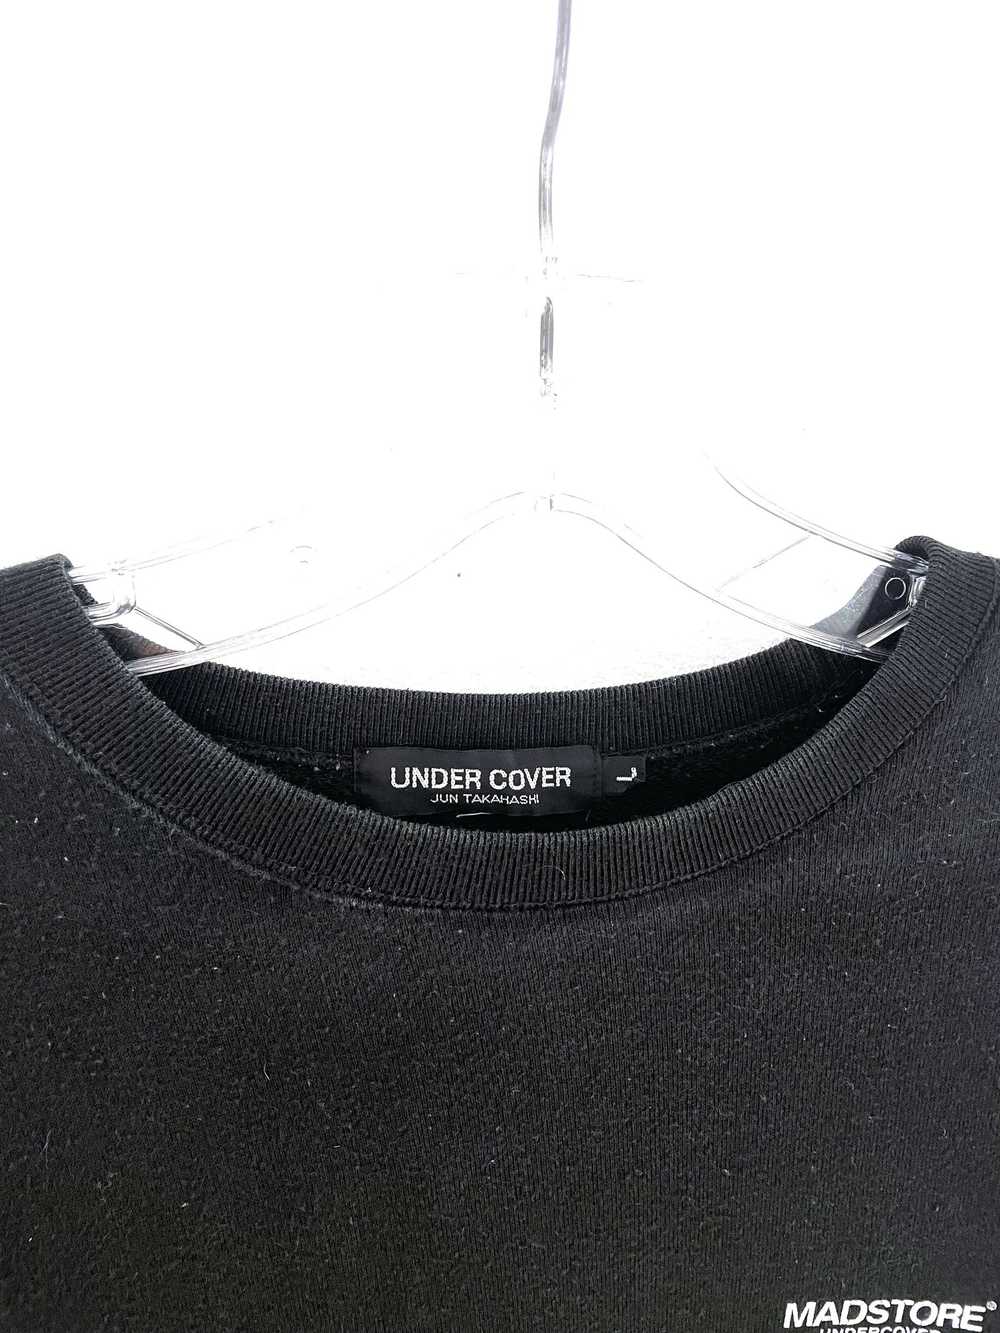 Undercover Mad Dog Sweater - image 6